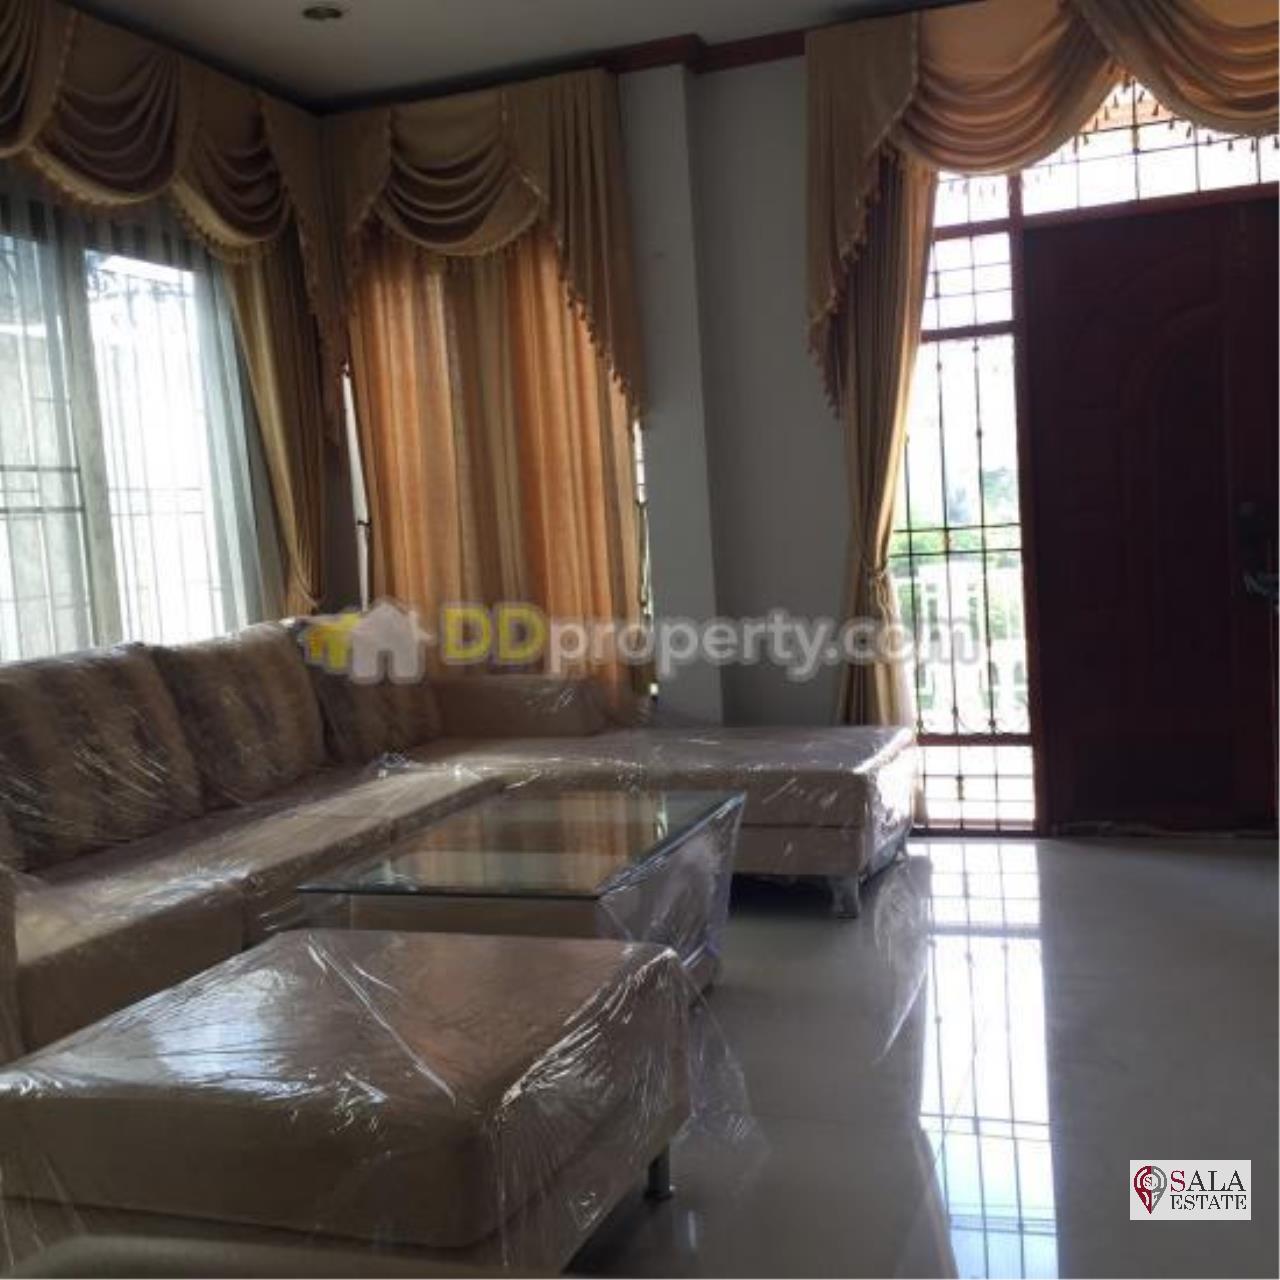 SALA ESTATE Agency's HOUSE FOR SALE - NEAR SUVARNABHUM AIRPORT AND BANG NA -TRAT RD. 5